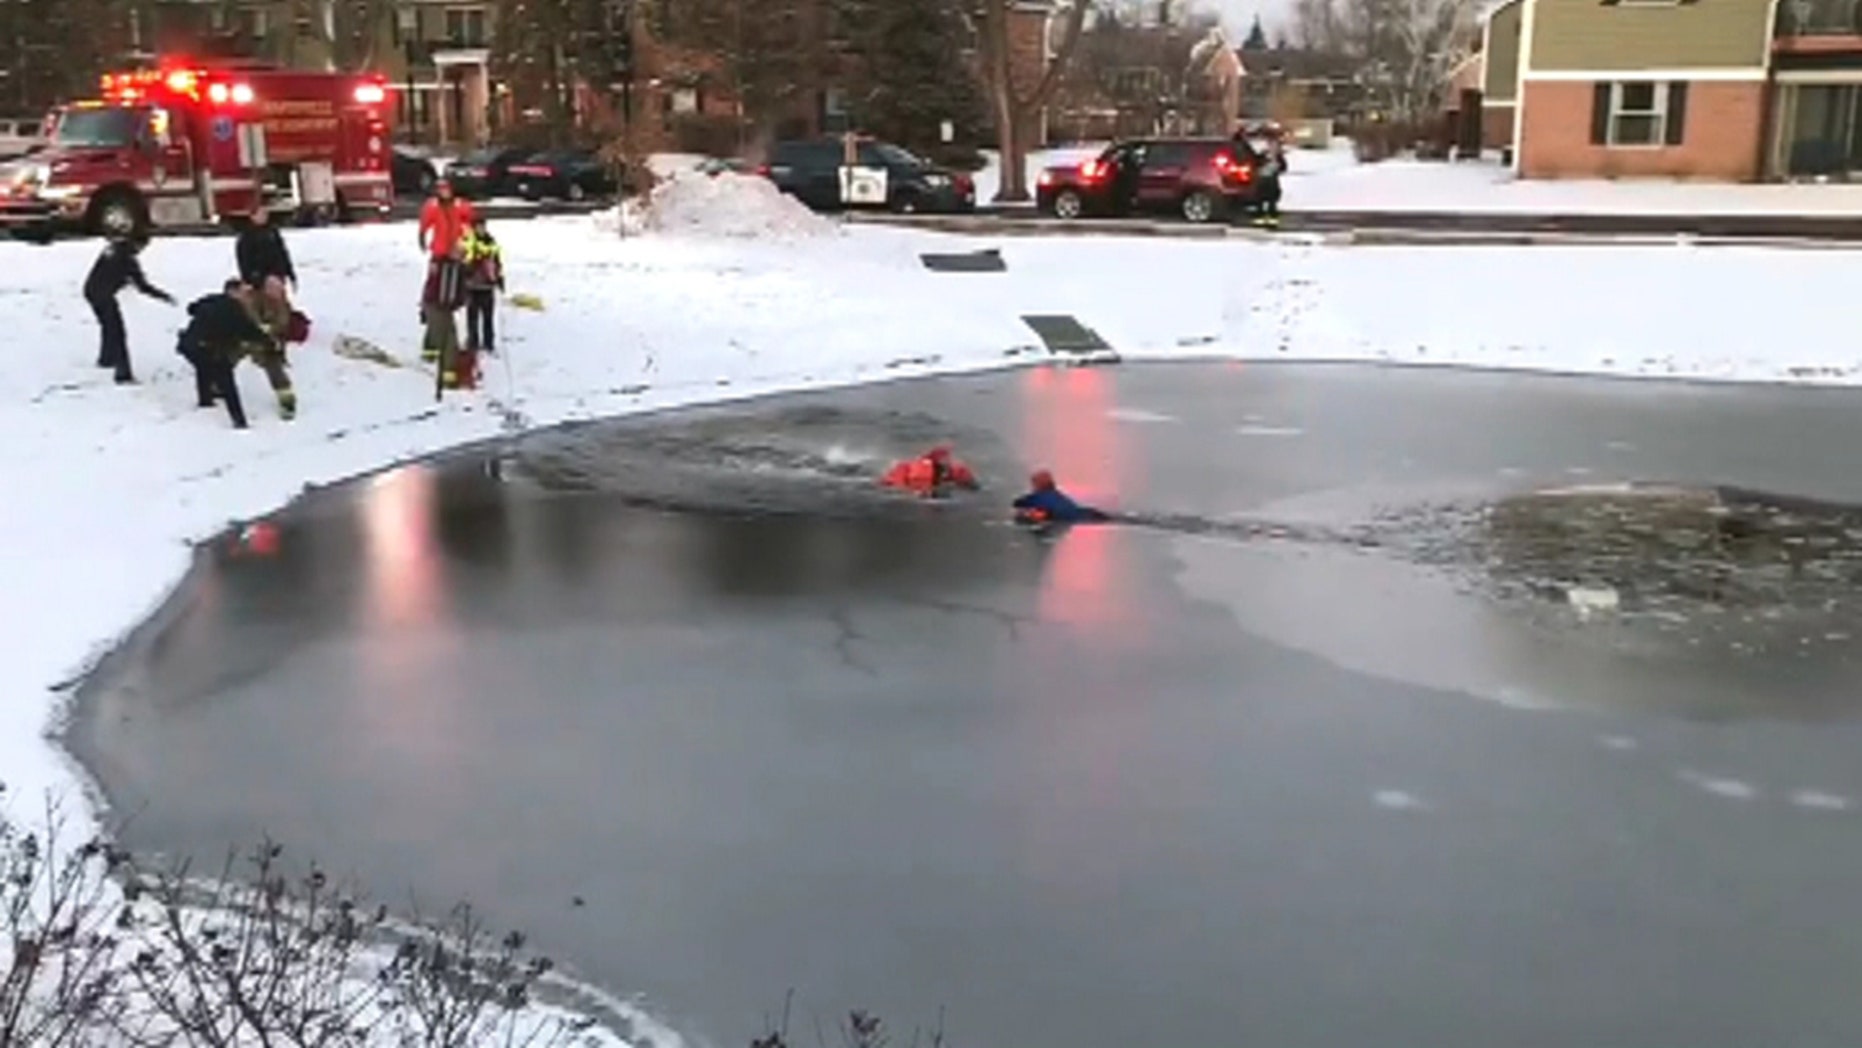 Dramatic rescue after boy, 11, falls through ice in Illinois pond seen in stunning video